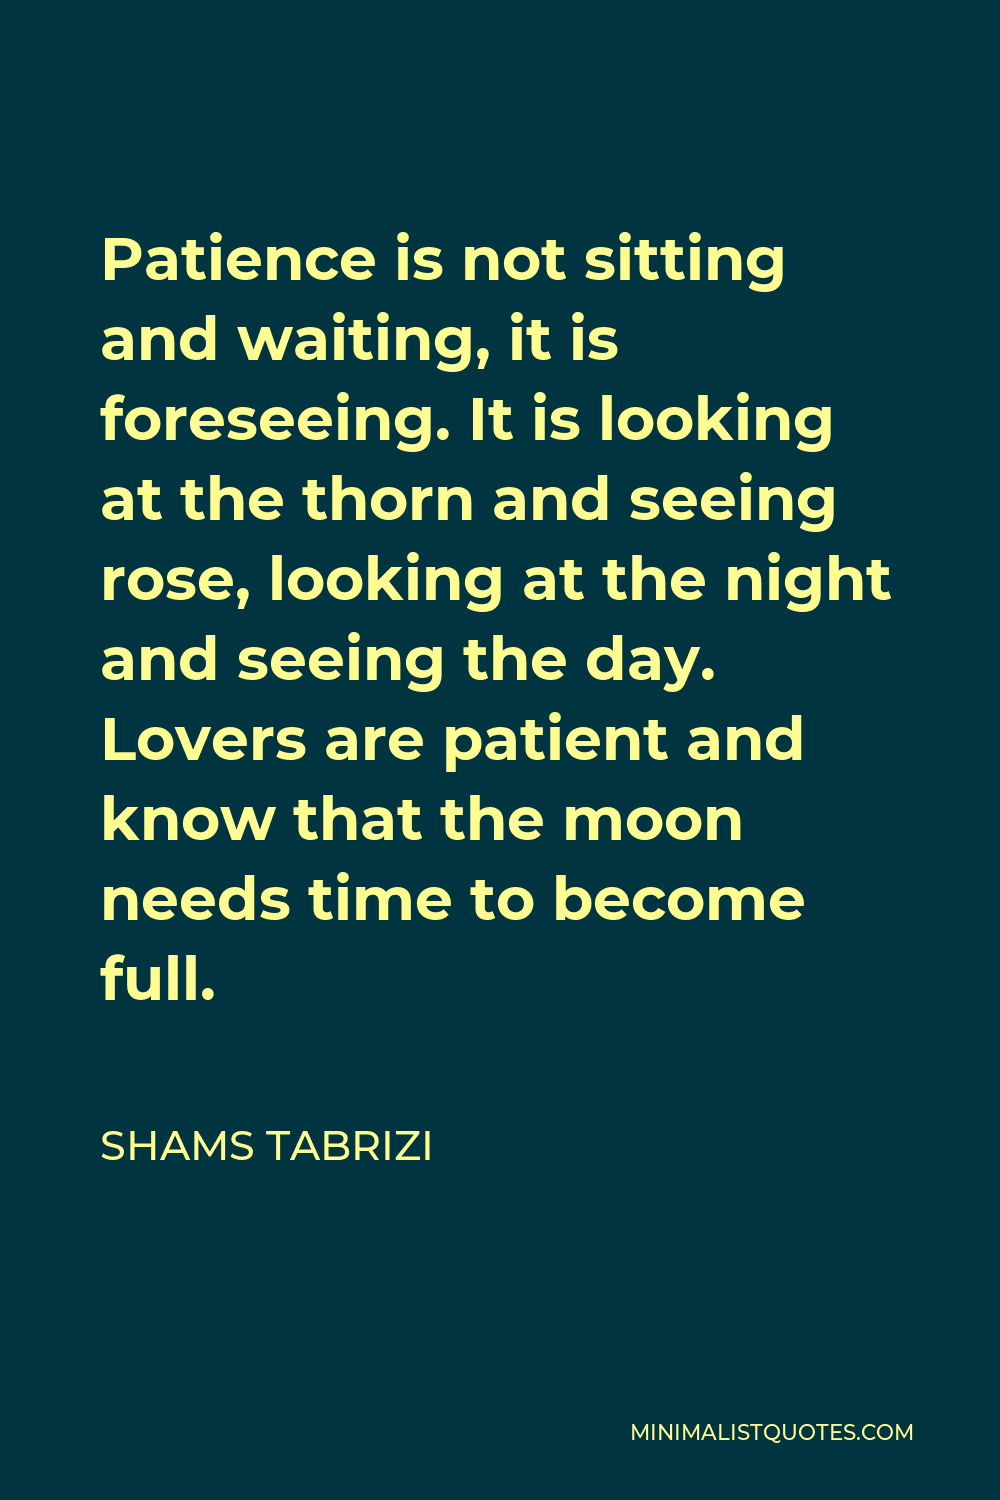 Shams Tabrizi Quote - Patience is not sitting and waiting, it is foreseeing. It is looking at the thorn and seeing rose, looking at the night and seeing the day. Lovers are patient and know that the moon needs time to become full.